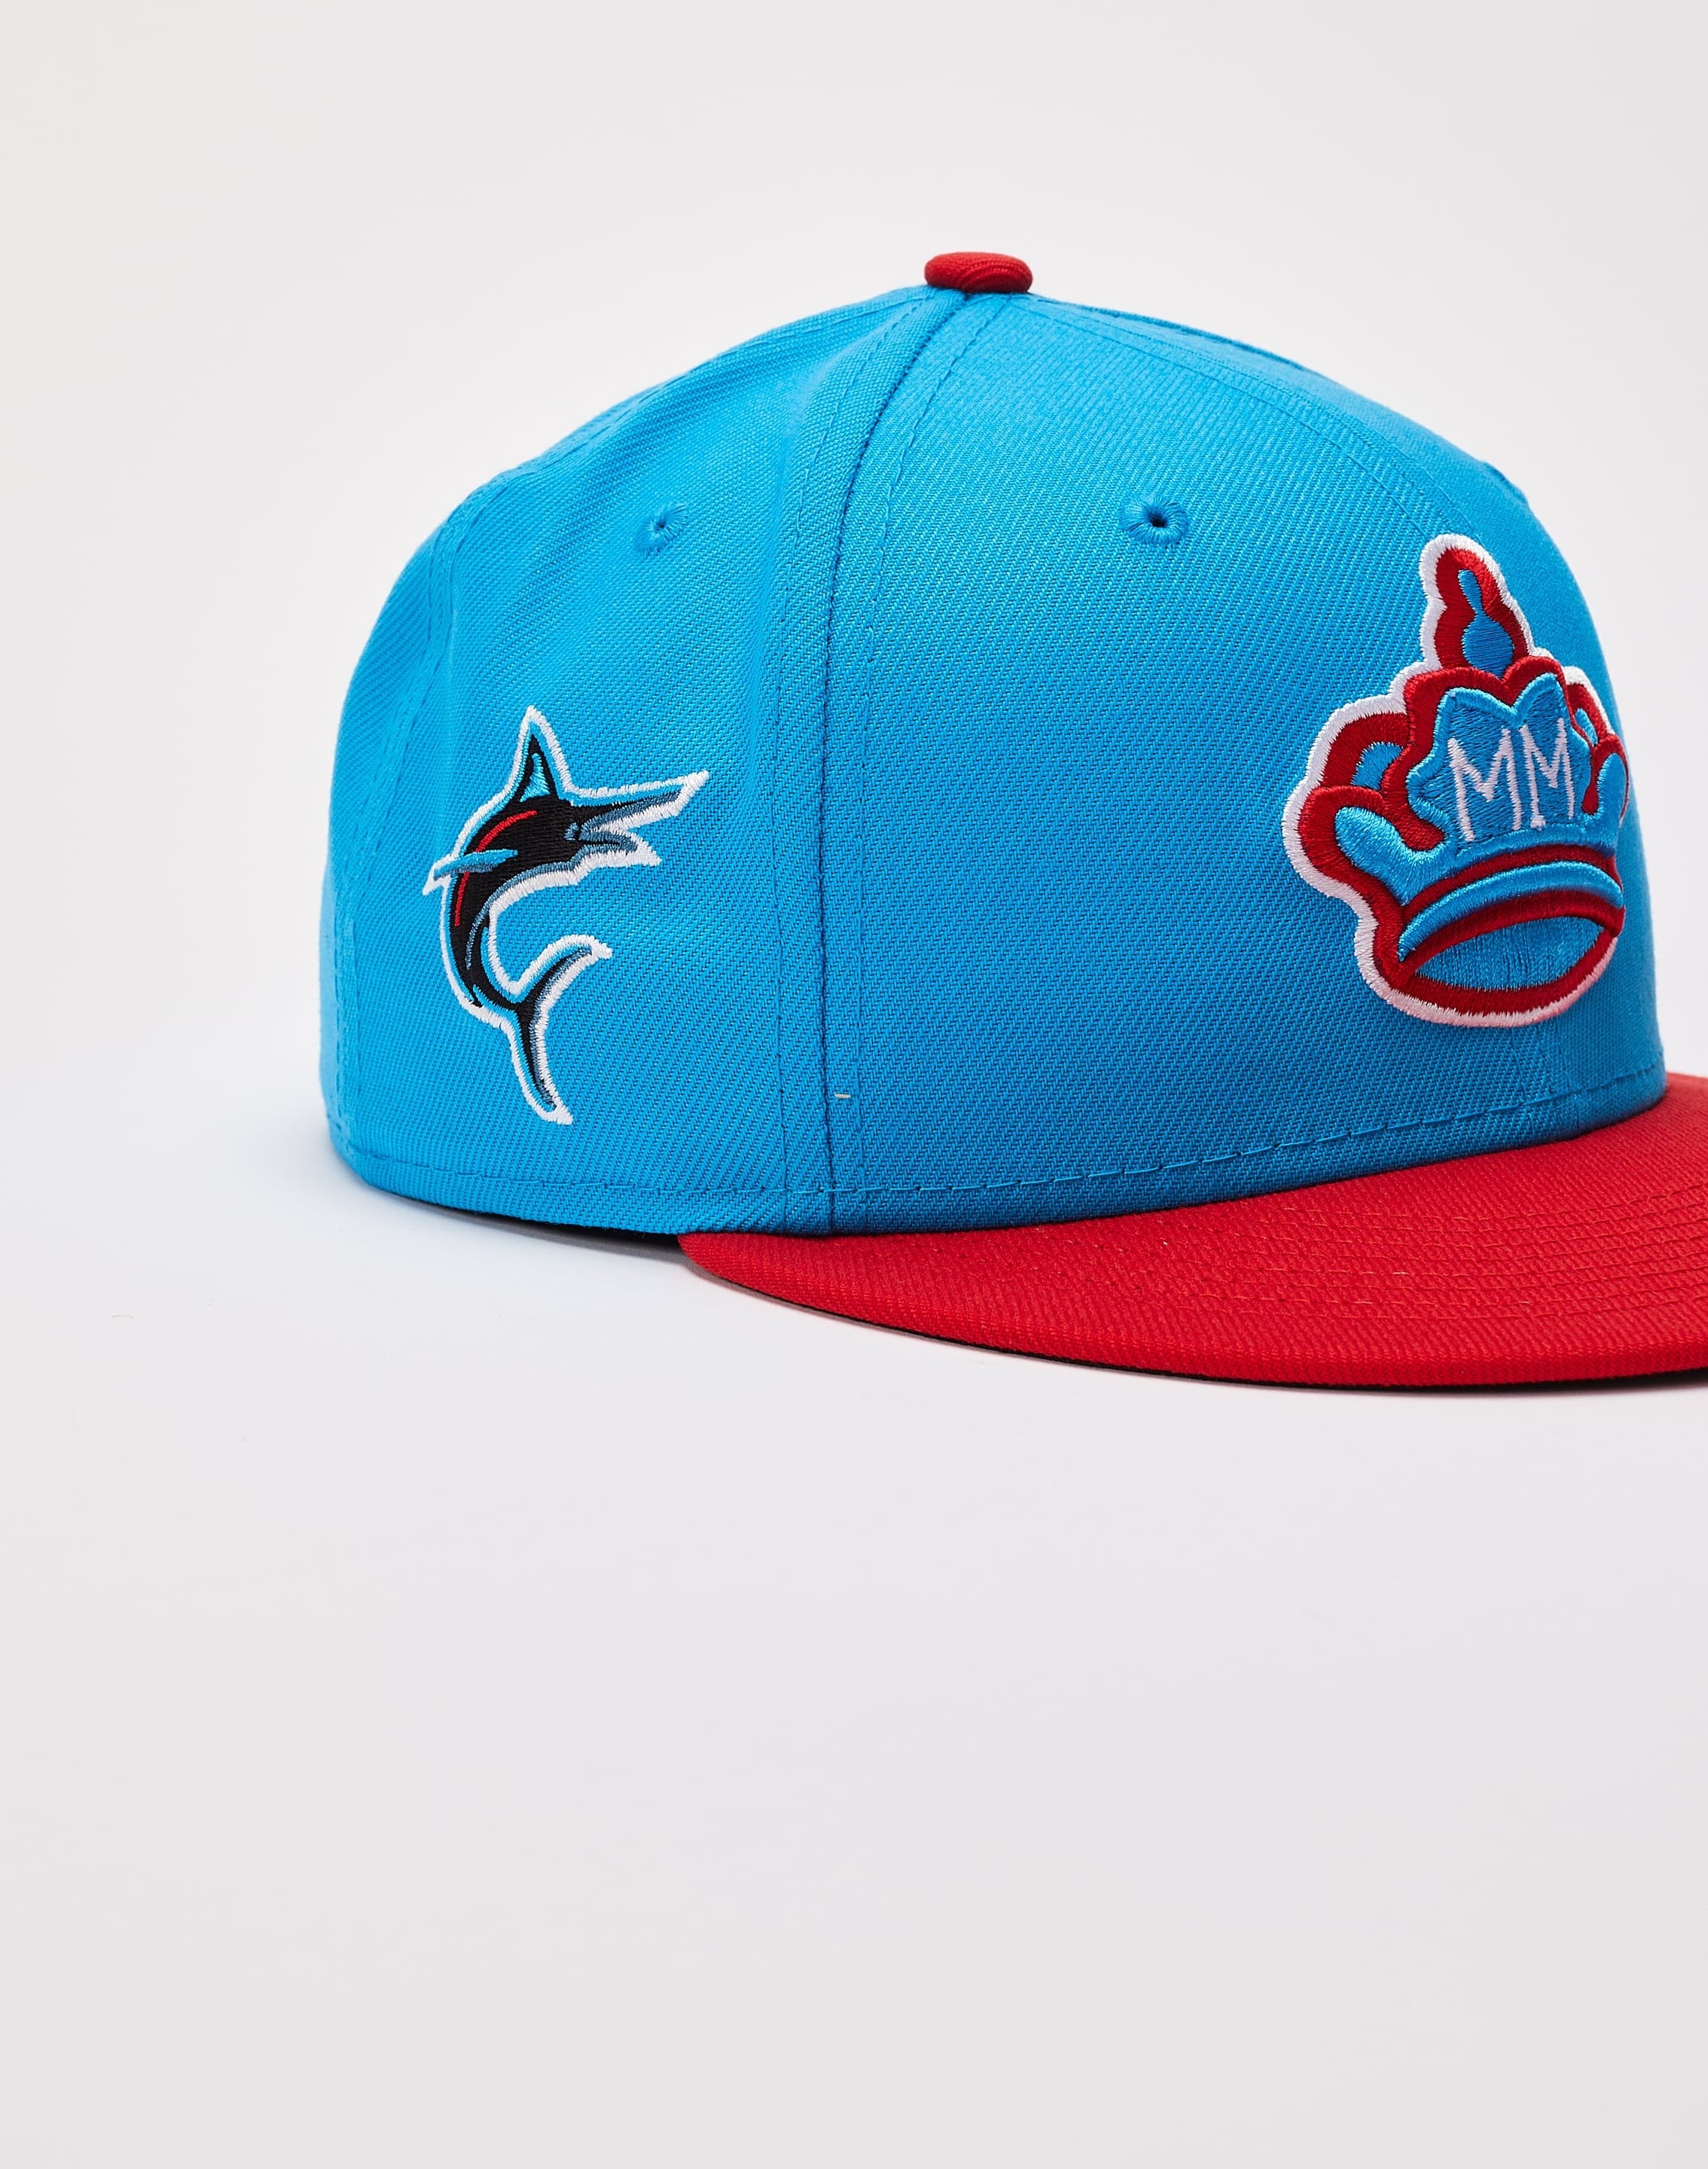 New Era 5950 Miami Marlins Mlb City Connect Fitted